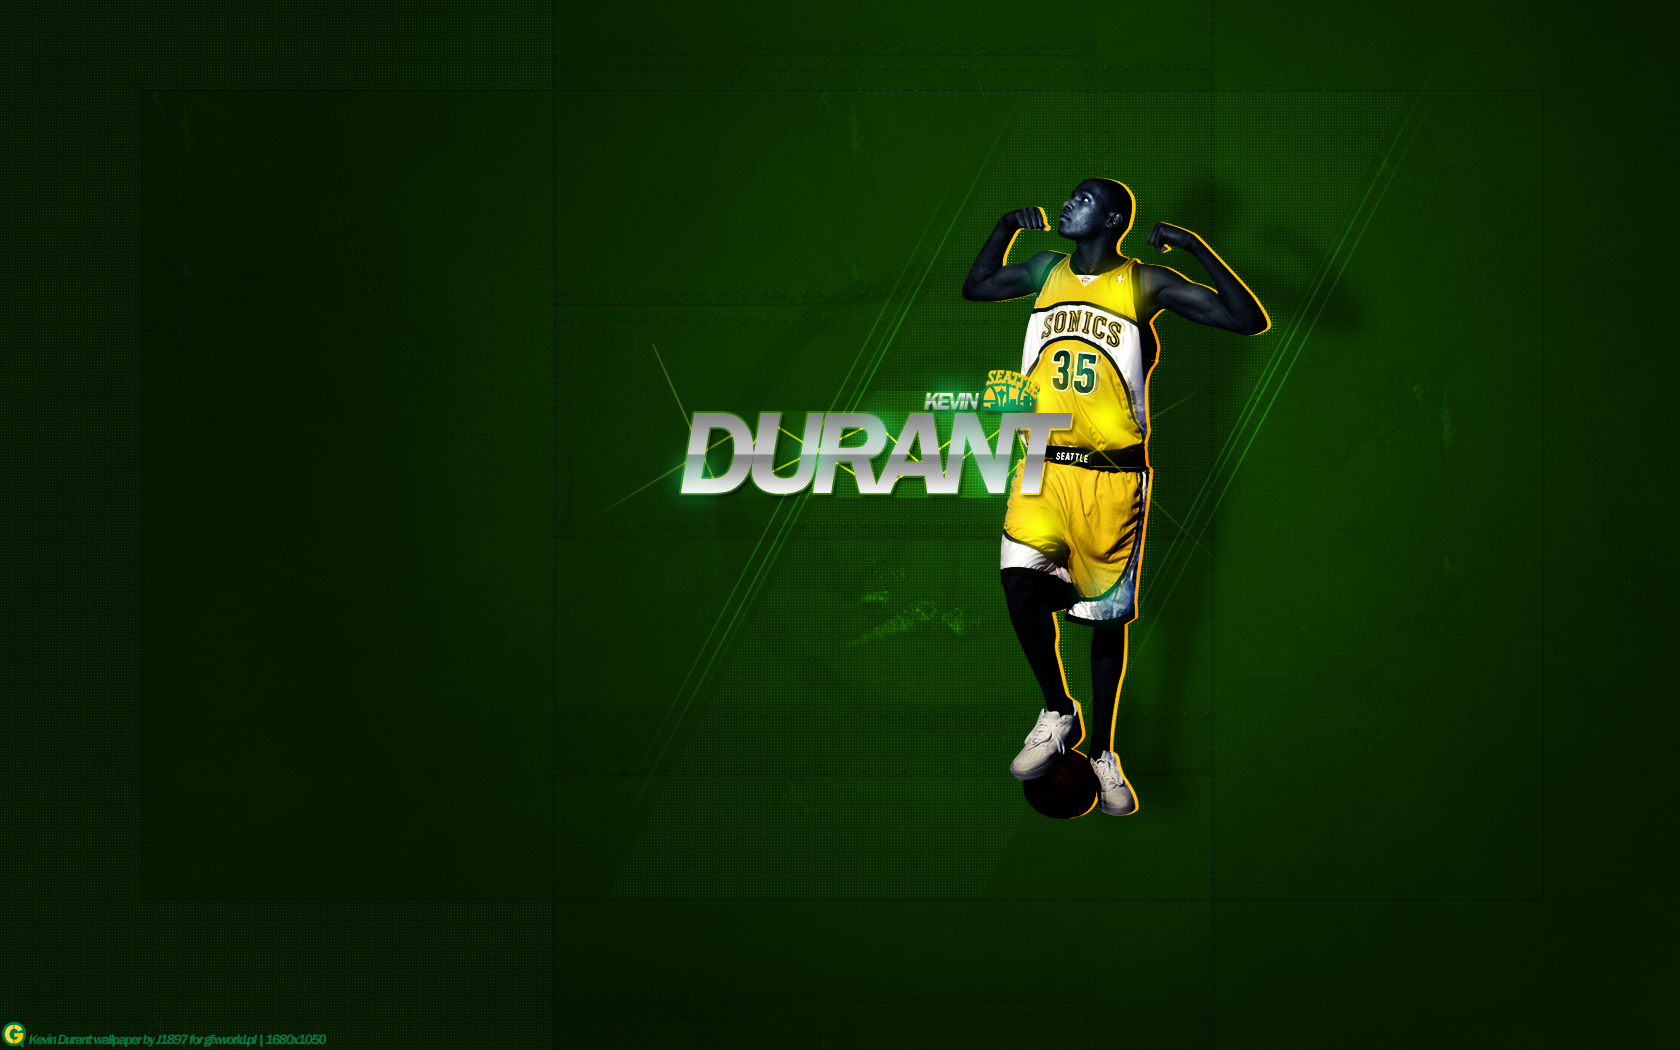 70. Kevin Durant